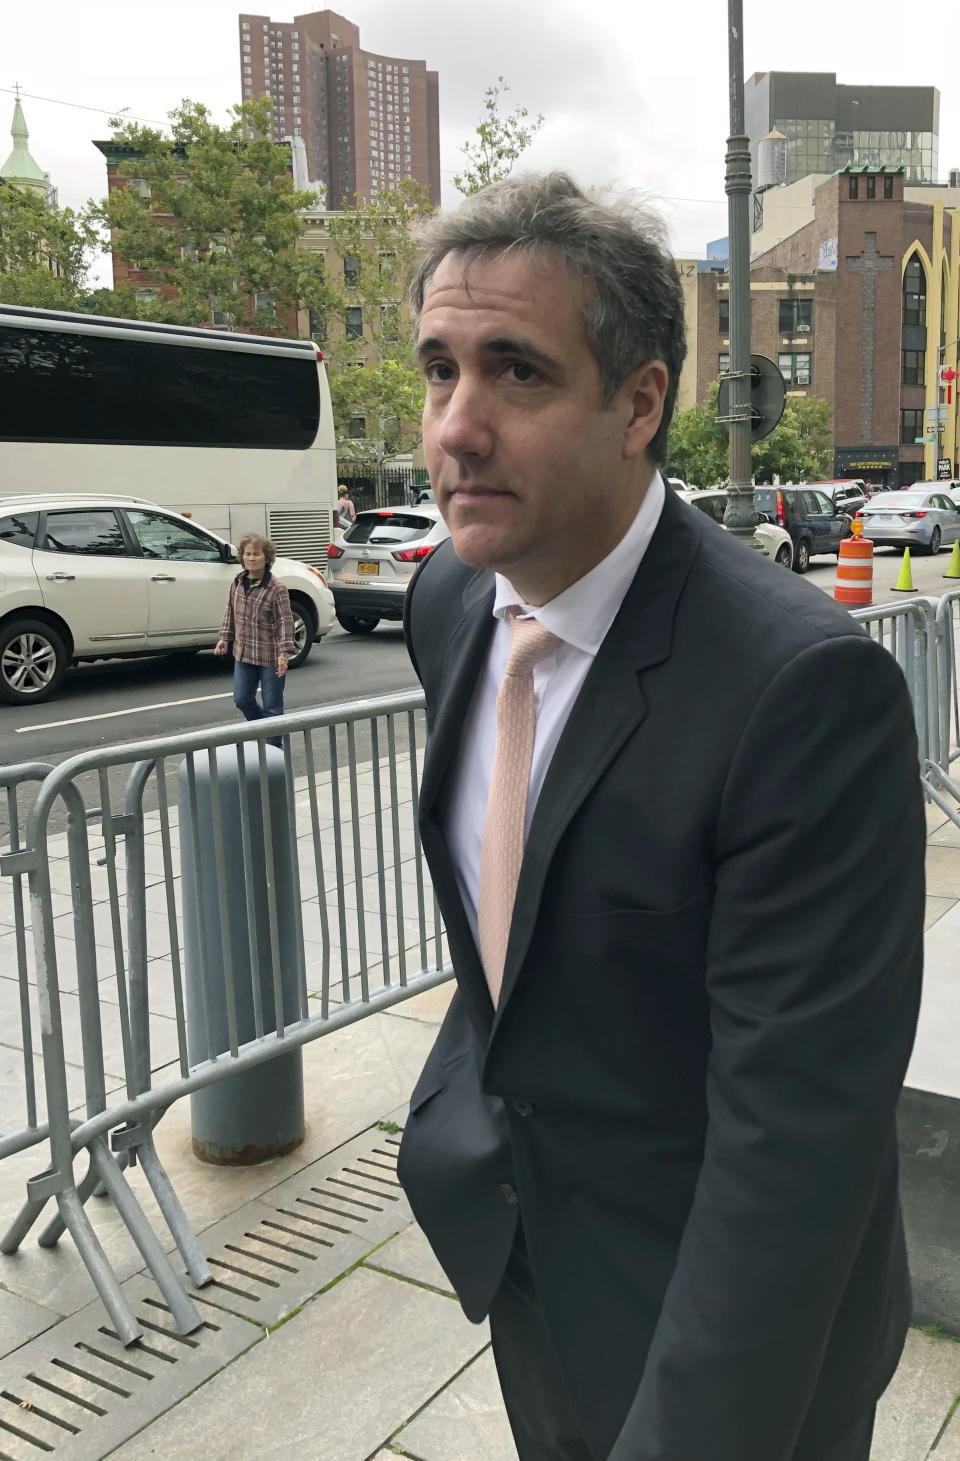 Michael Cohen, President Trump's former lawyer, waits for his ride after making an unannounced visit to the federal courthouse in New York, Friday, Sept. 21, 2018. Cohen left the building, declining to say why he was there as well as refusing to talk about any discussions he's had with special counsel Robert Mueller. (AP Photo/Larry Neumeister)